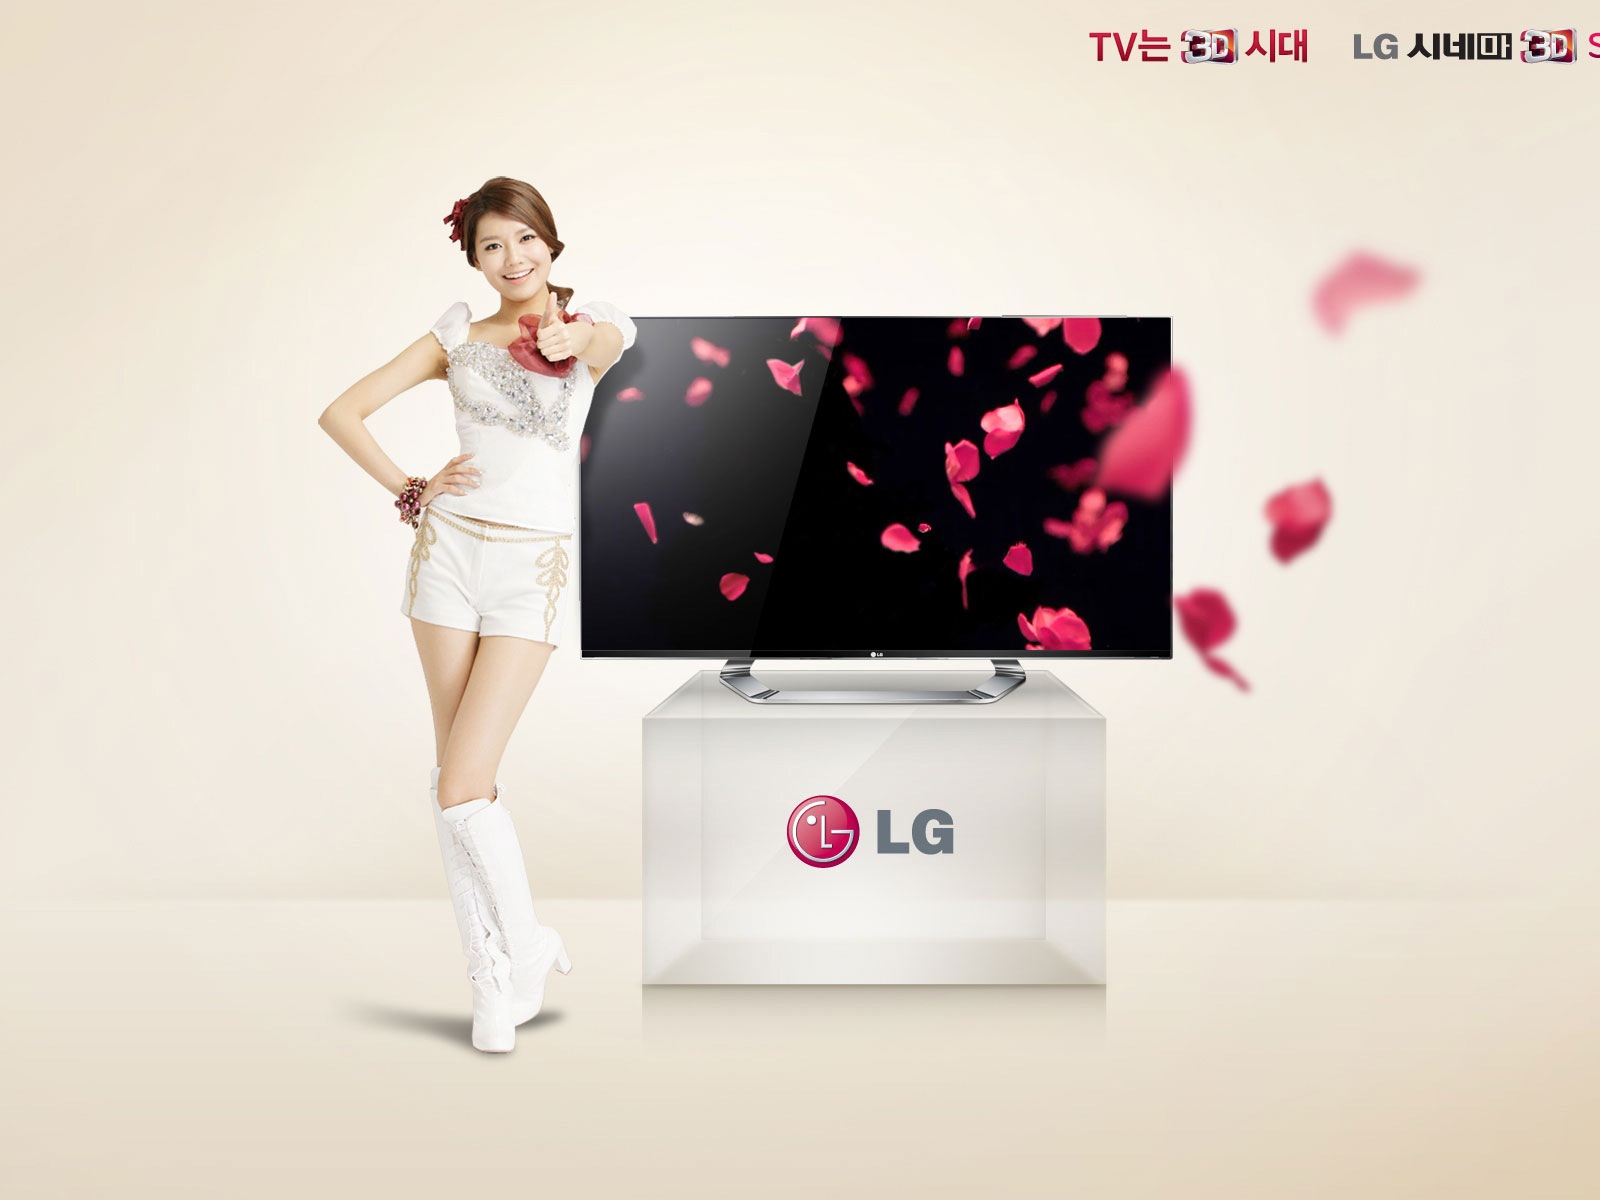 Girls Generation ACE and LG endorsements ads HD wallpapers #12 - 1600x1200